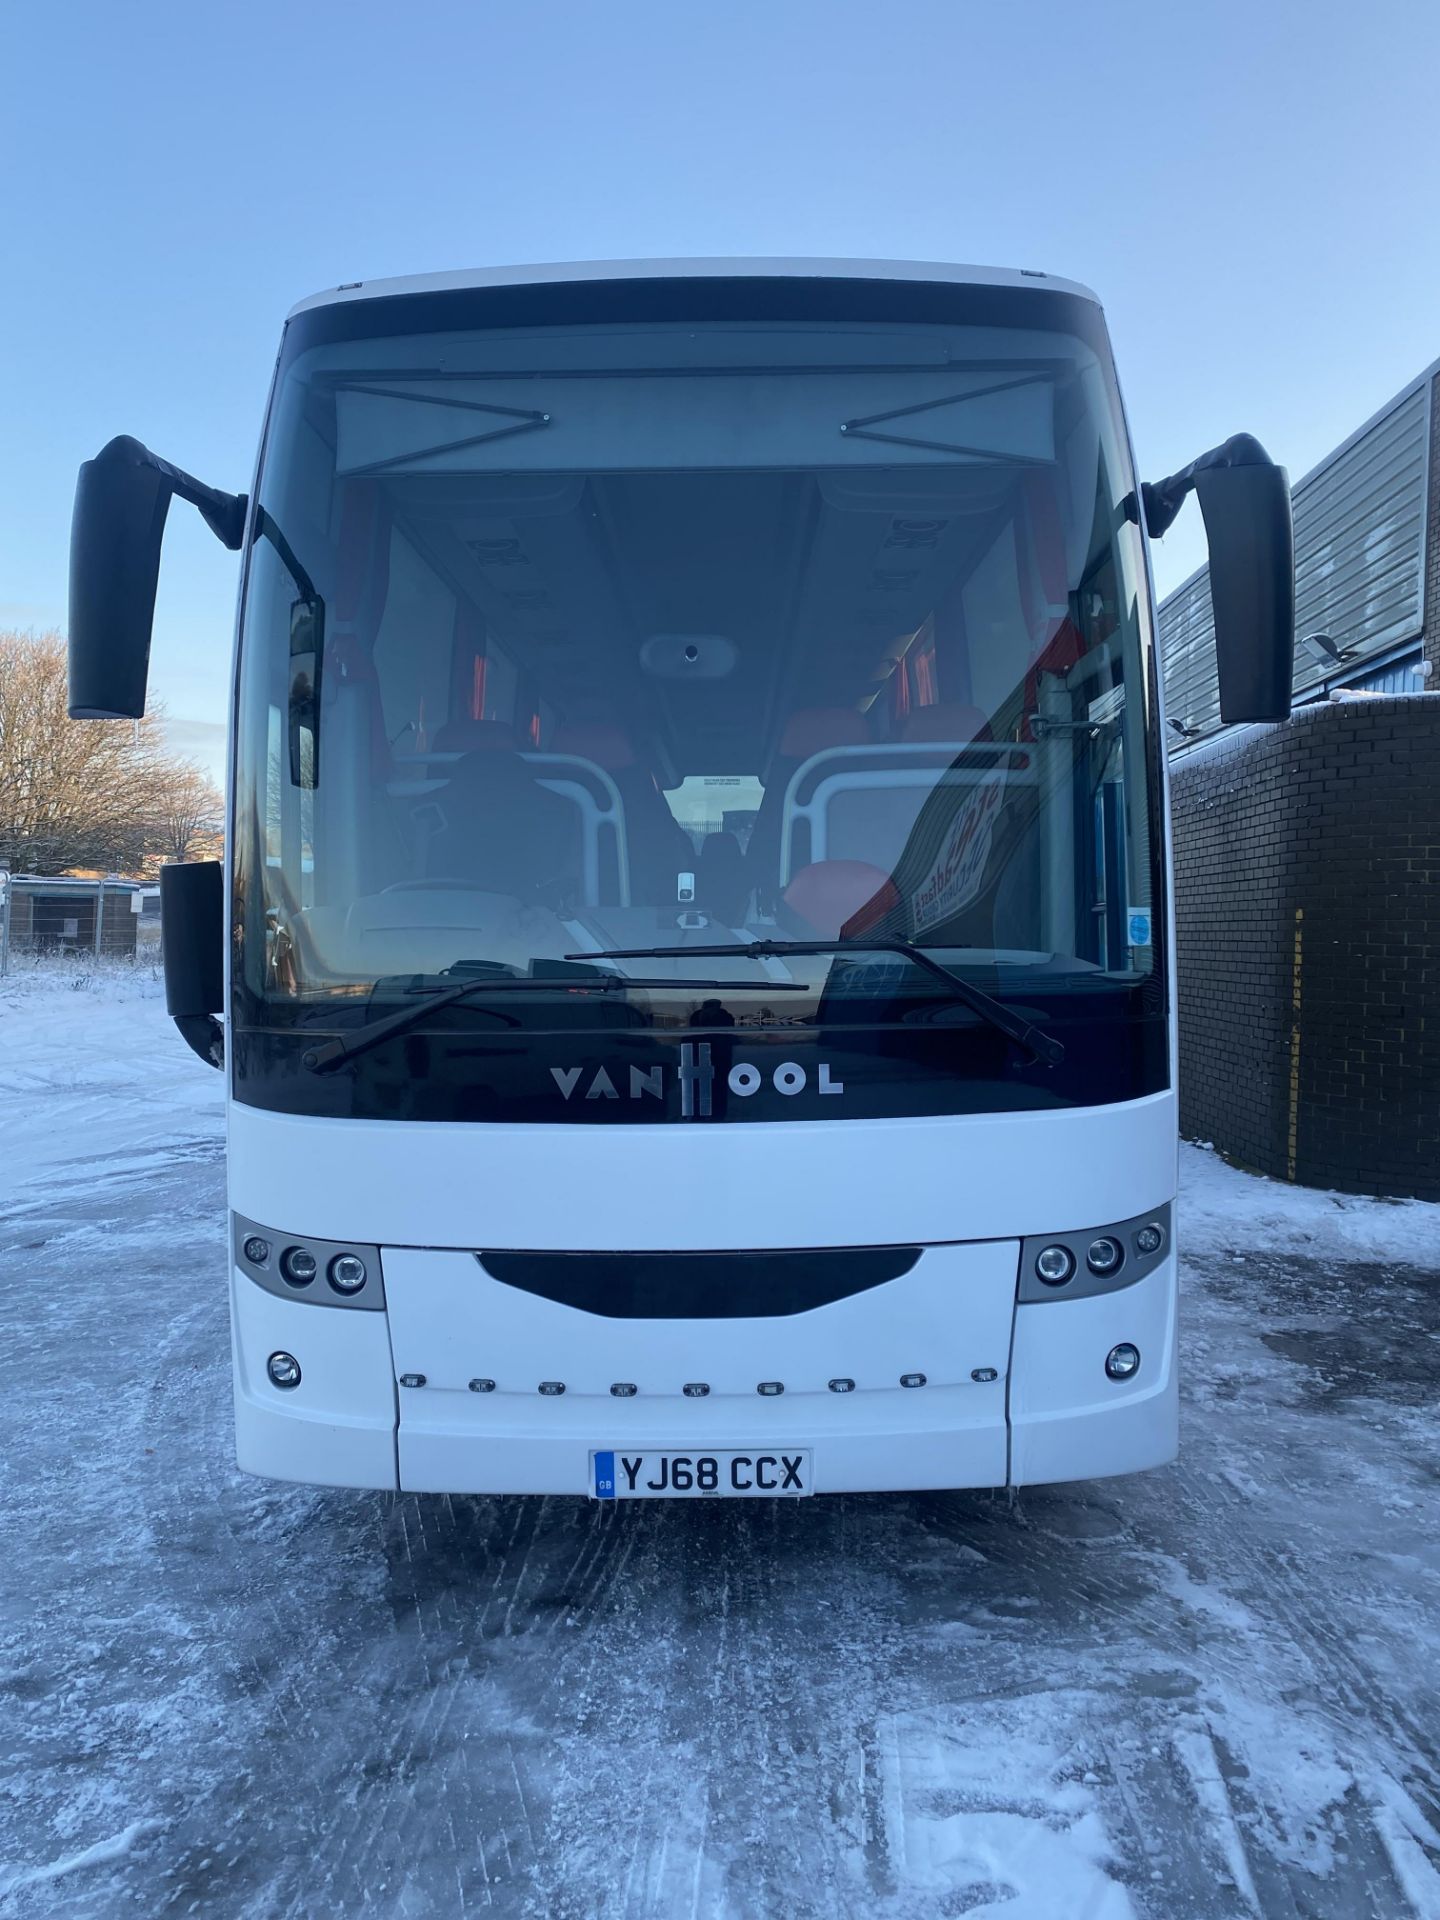 Vanhool EX15H auto 51+2 seater coach, Registration YJ68 CCX , first registered 1st January 2019, 1